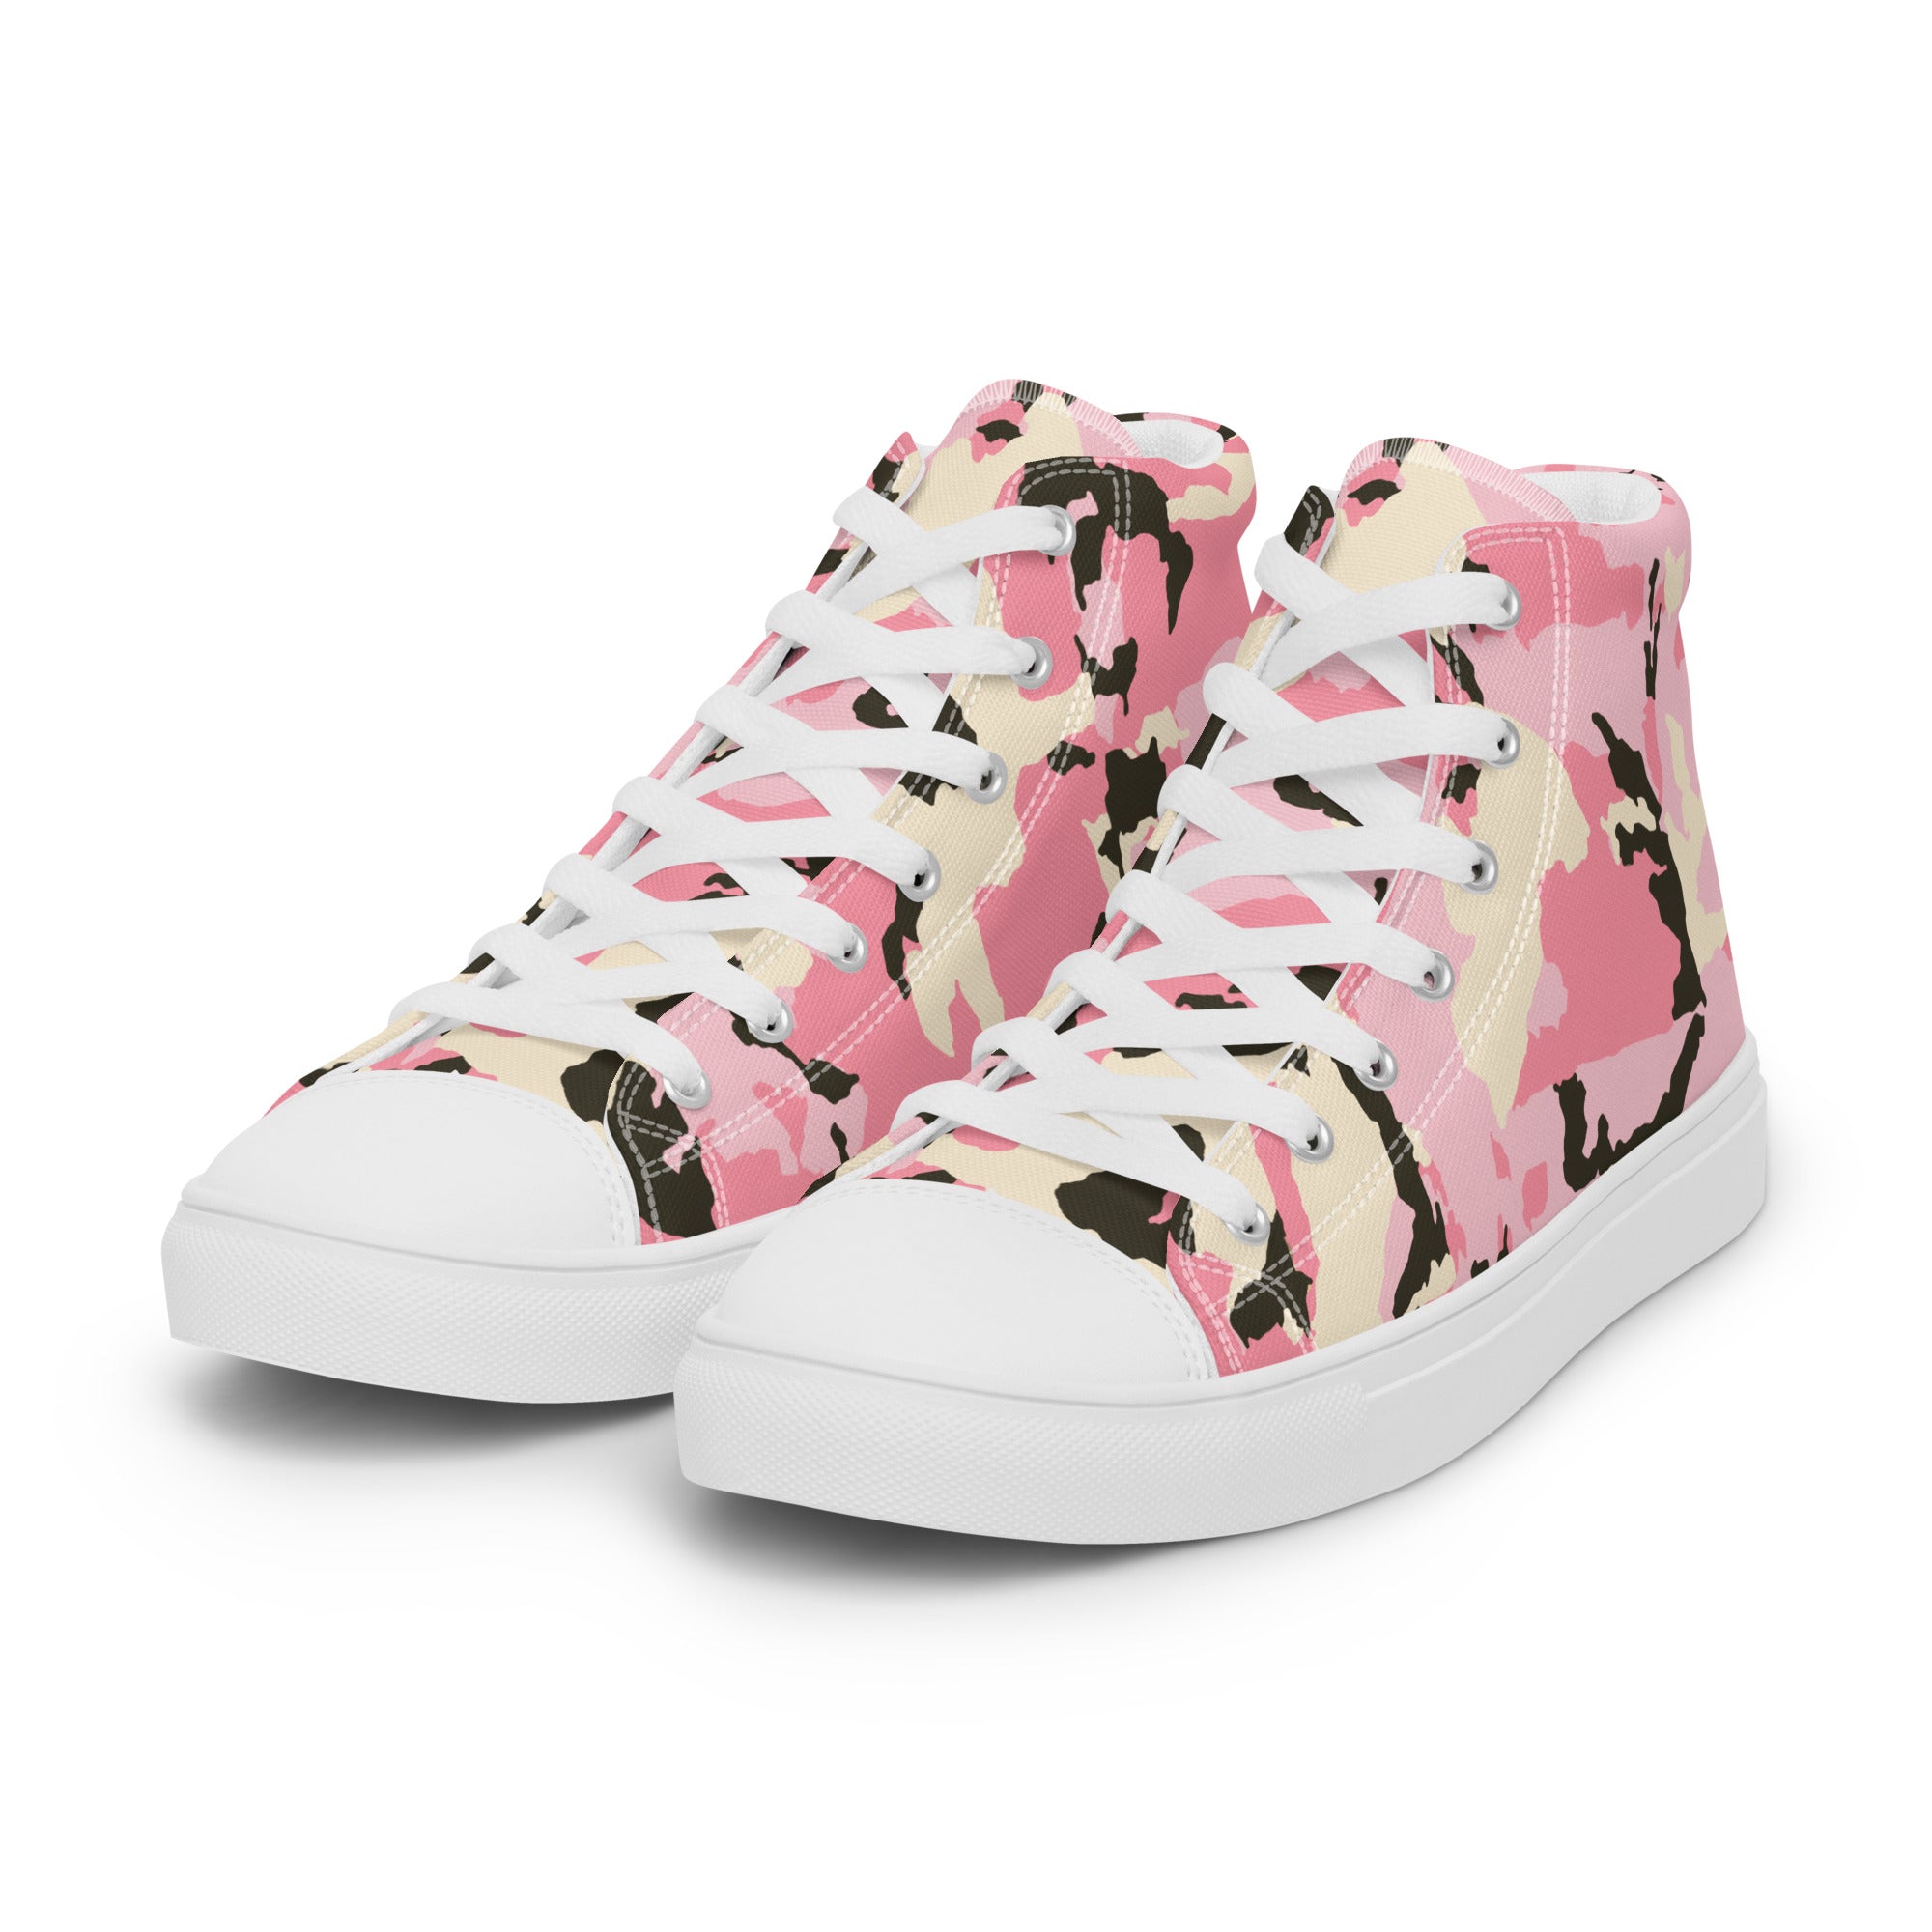 Women’s high top canvas shoes- Camo Pink